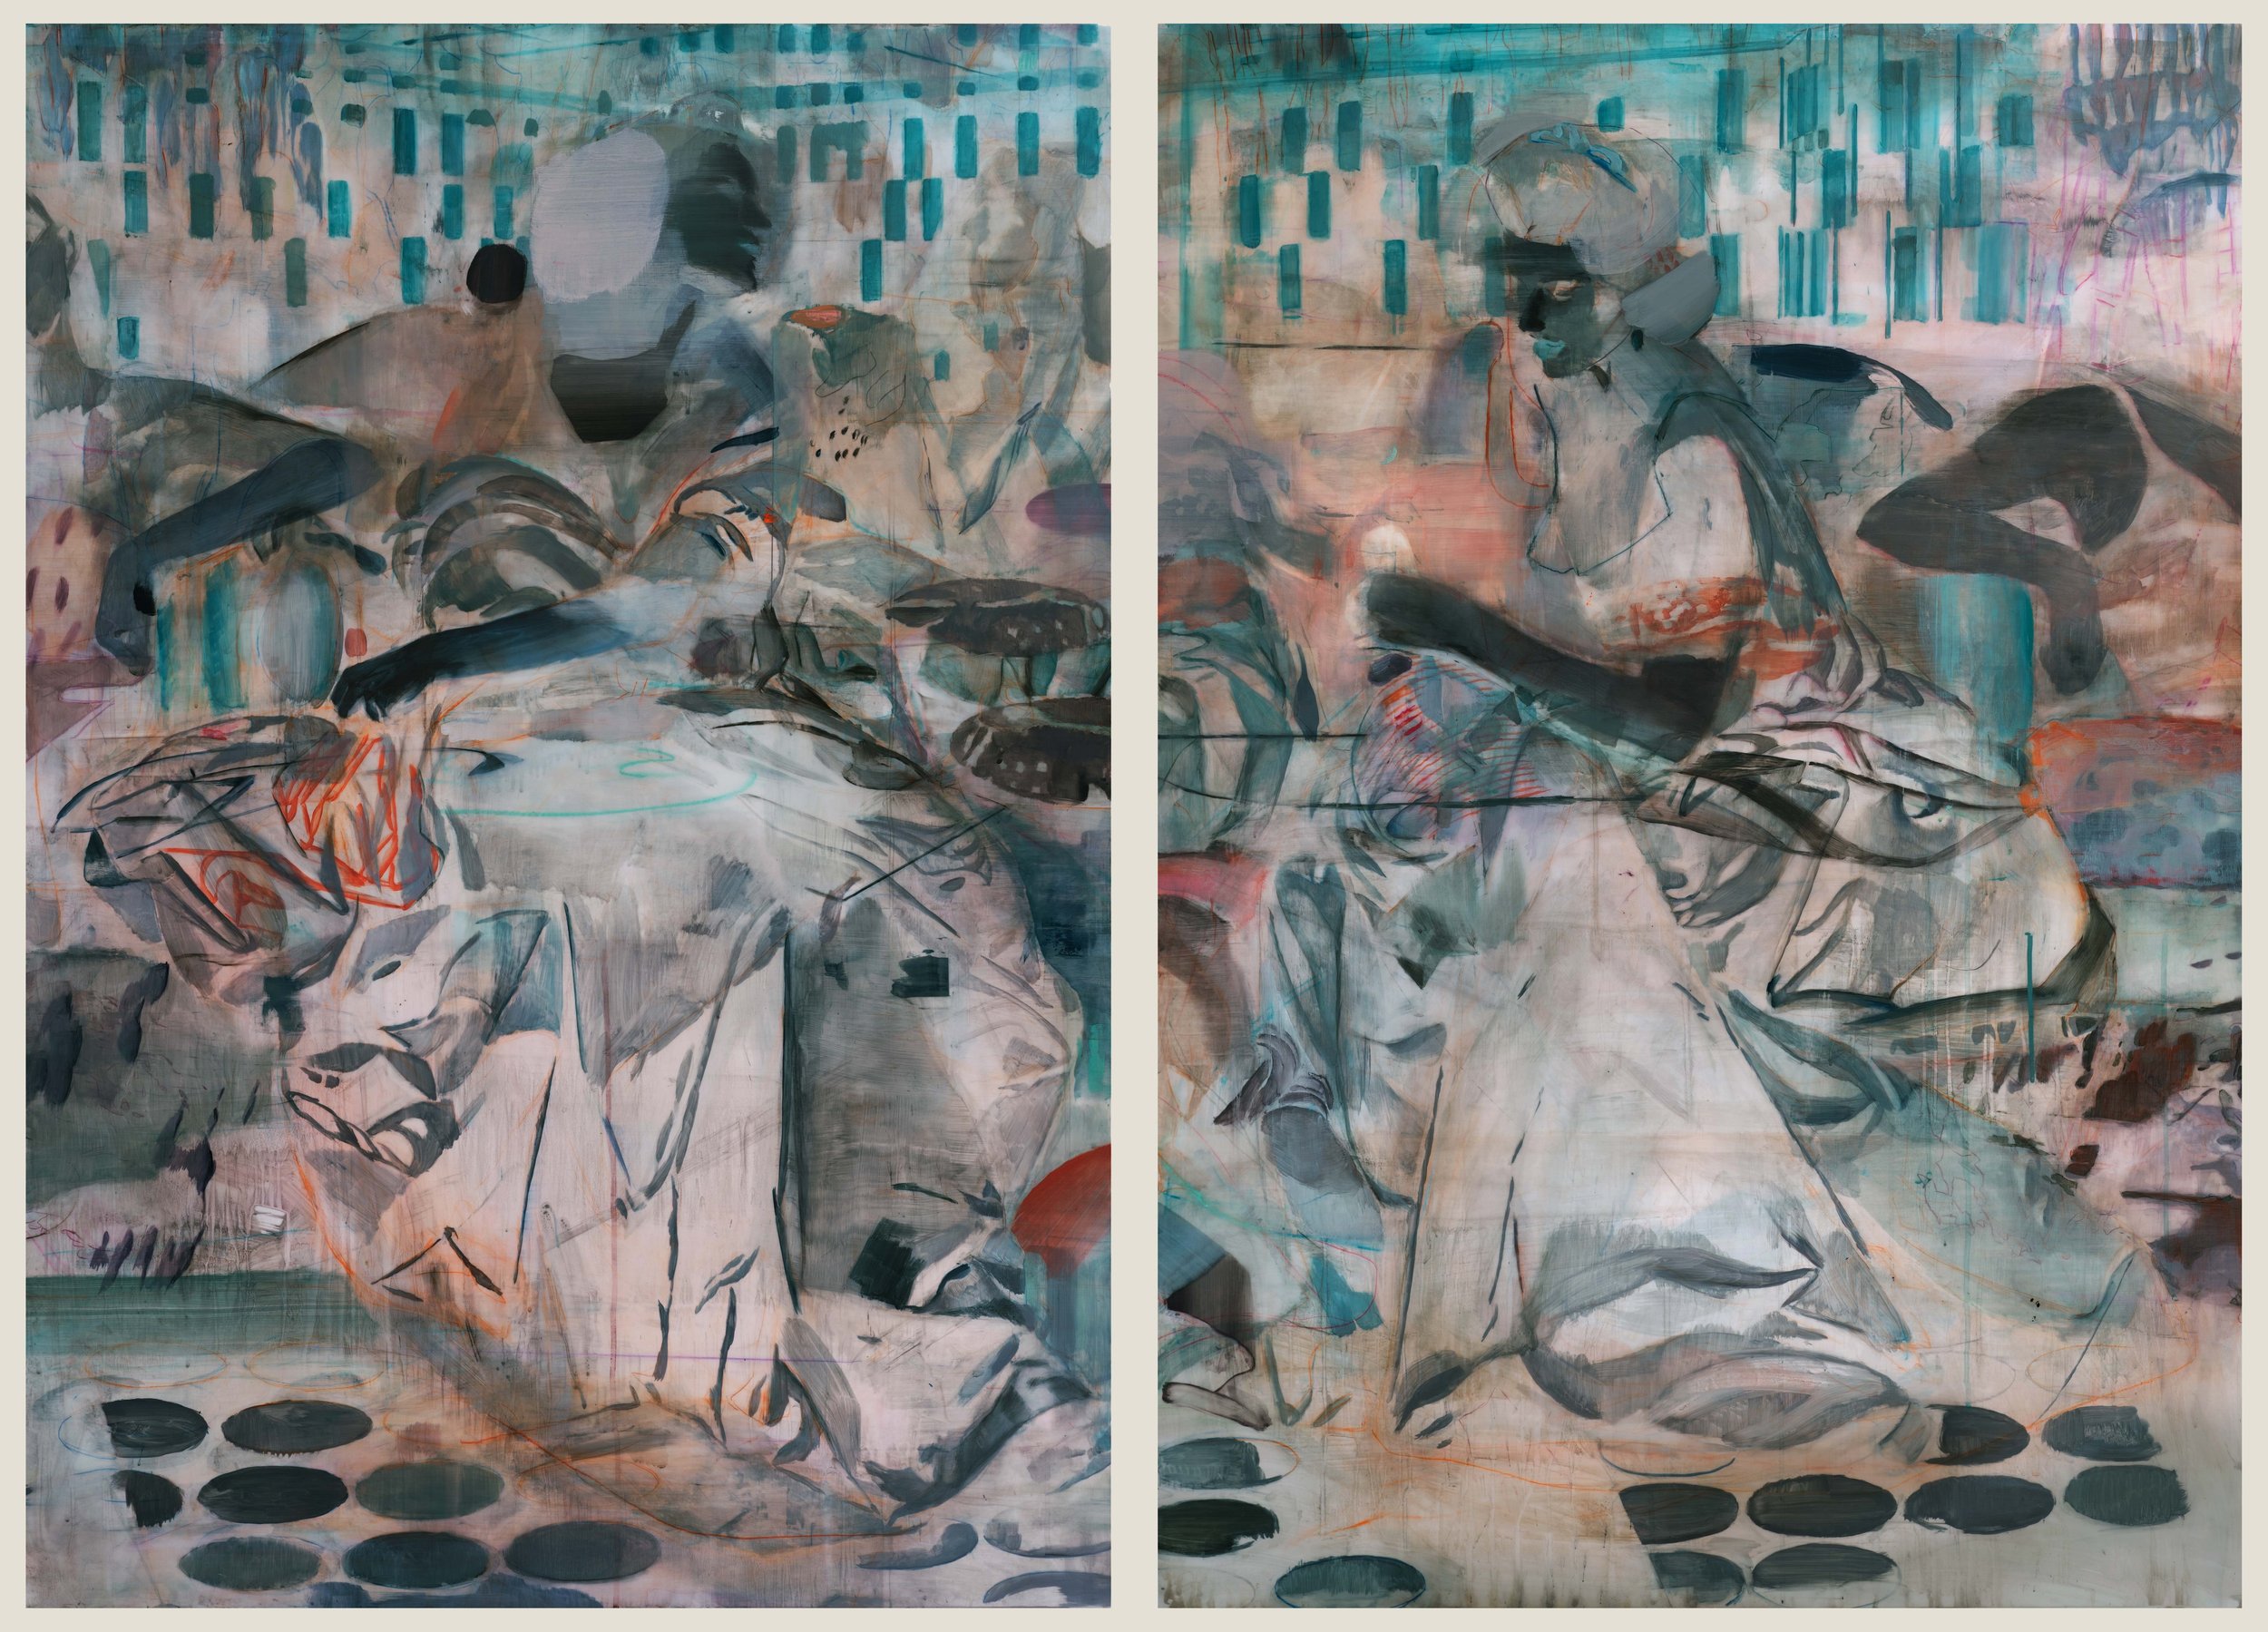   Pre-coital (after Artemisia)  2022, Mixed media on polyester film 122 x 171 cm (two panels) 